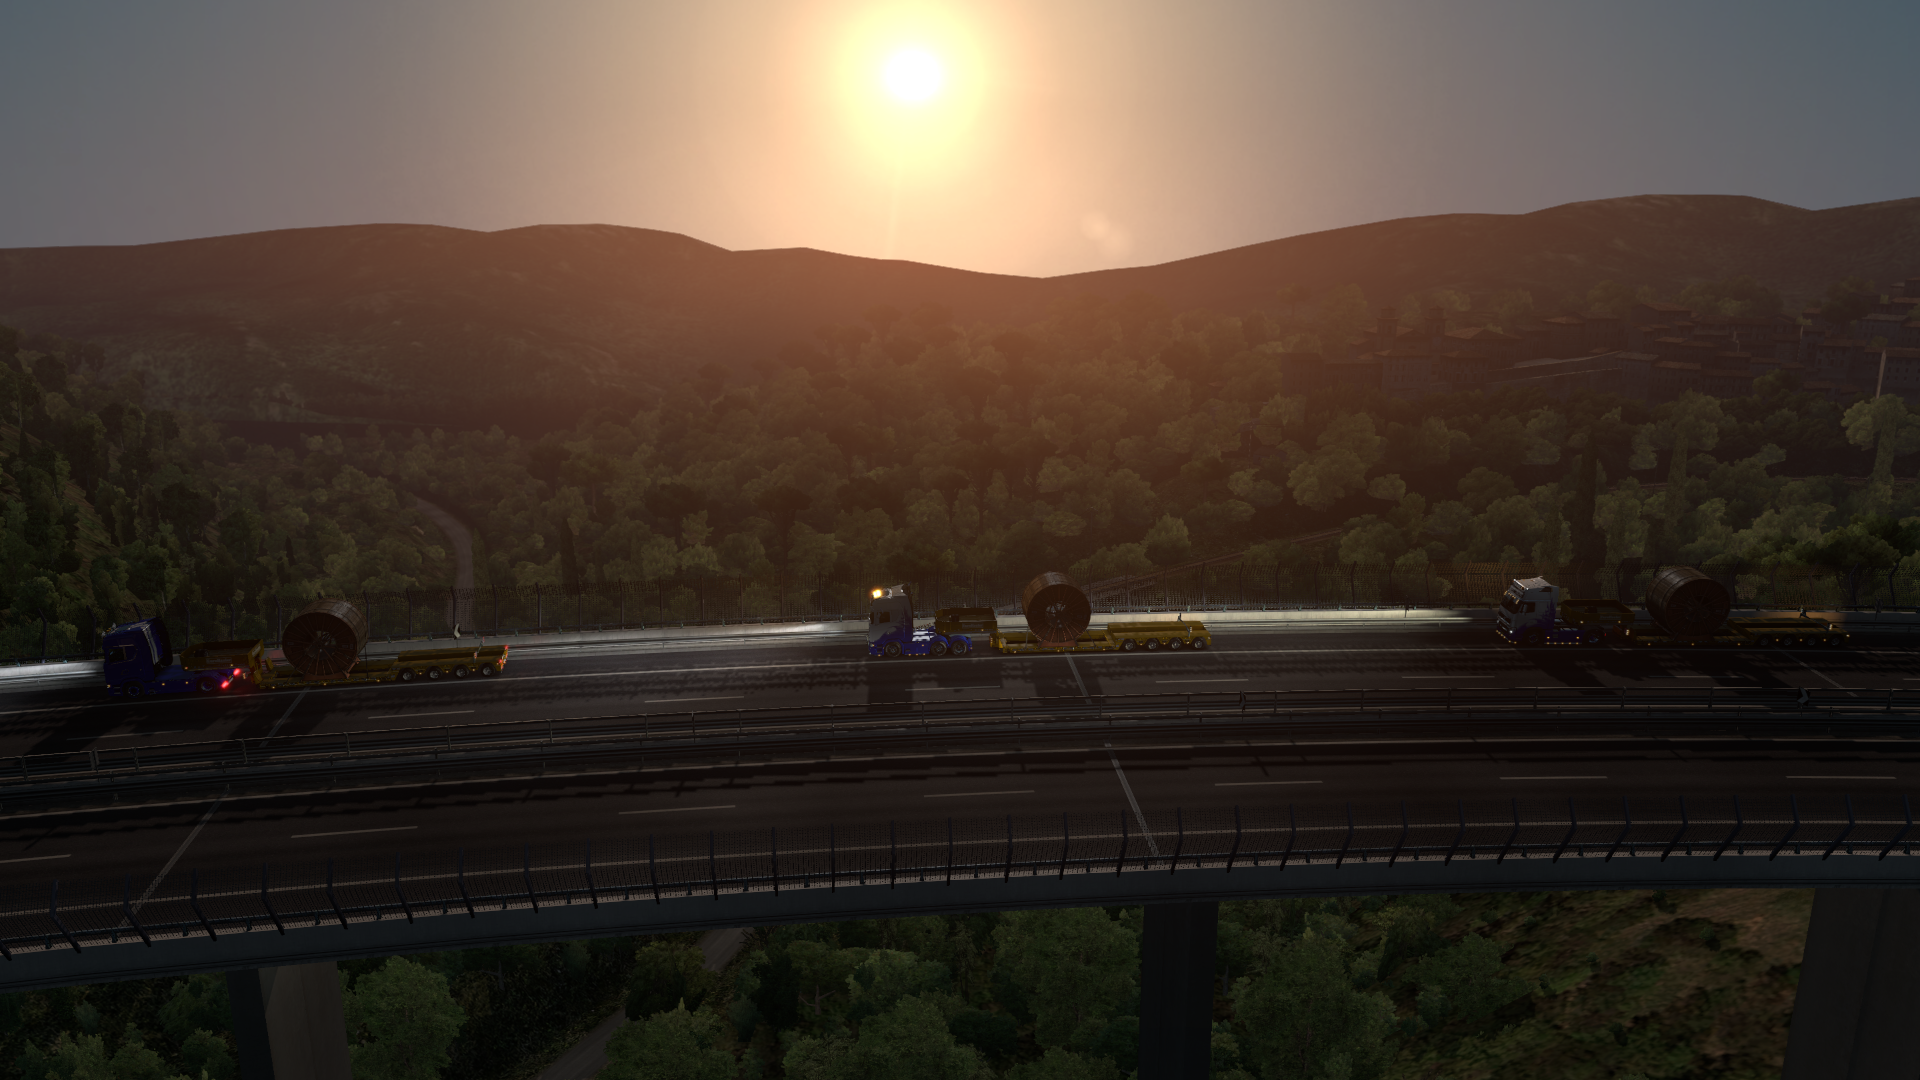 ets2_20200210_222027_00.png